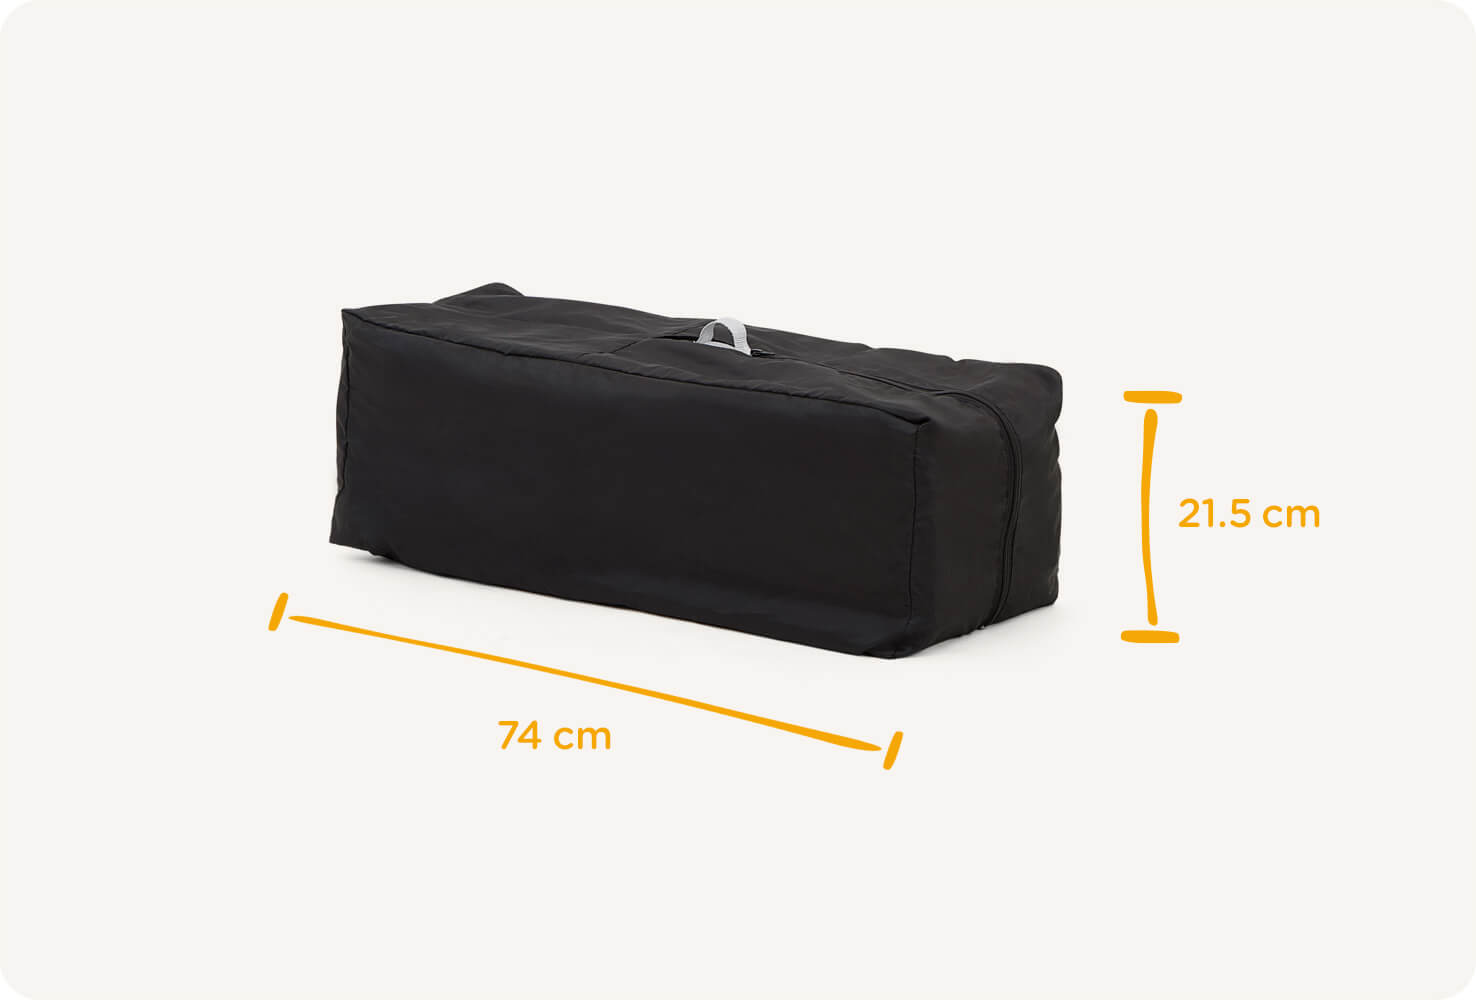 Folded Joie Kubbie travel cot with orange lines indicating the length is 80.5 cm and height is 25 cm.